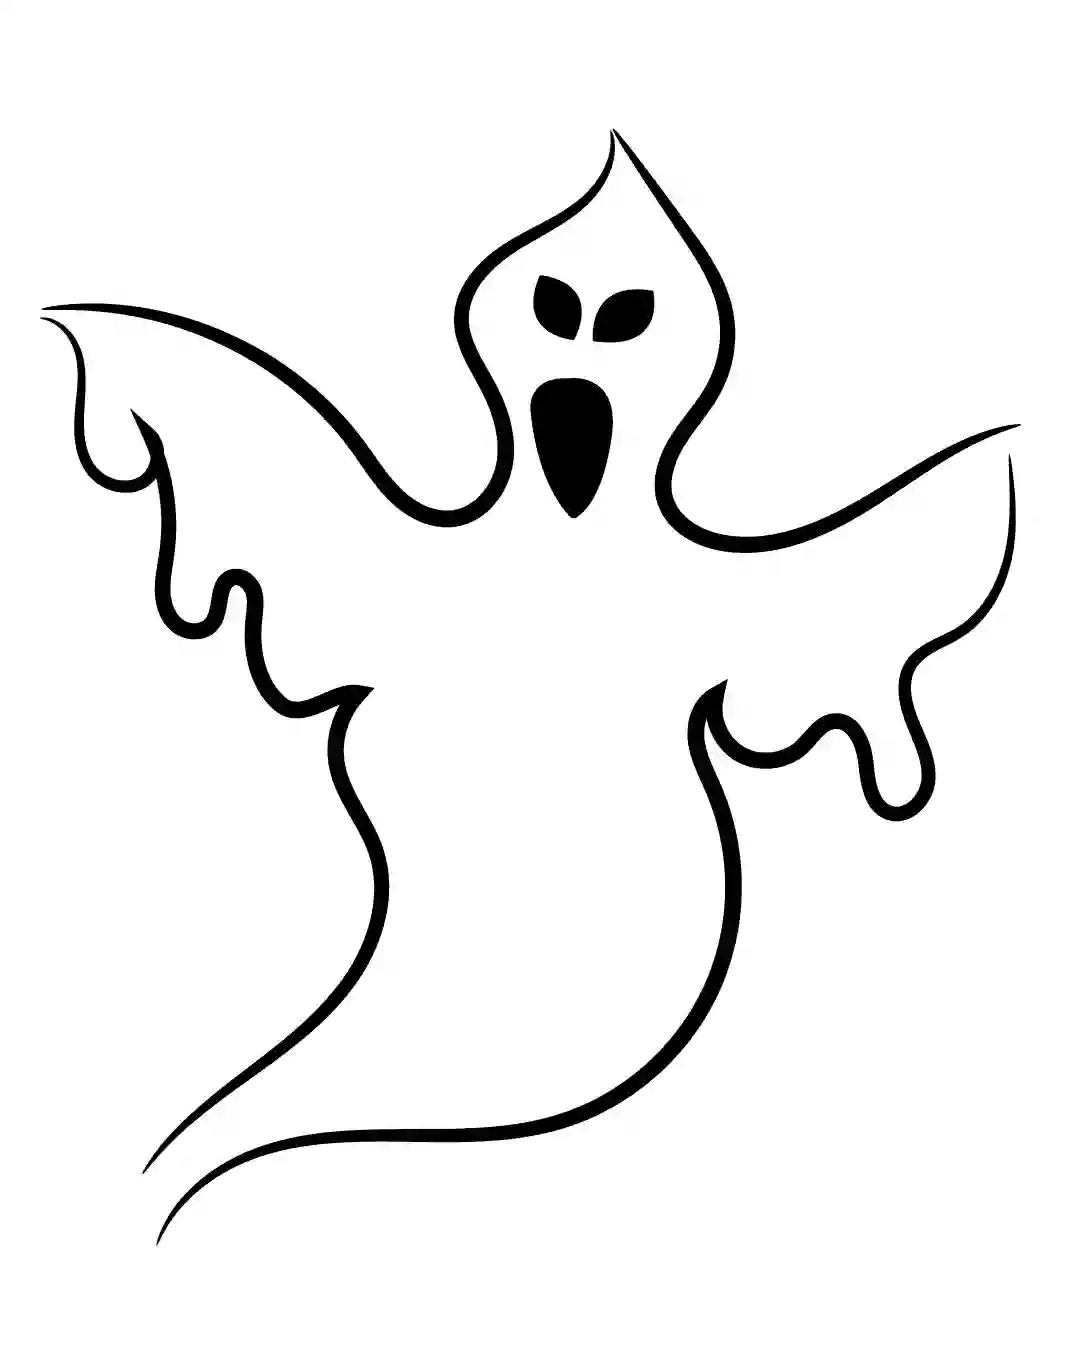 How To Draw Ghost In Simple And Easy Steps